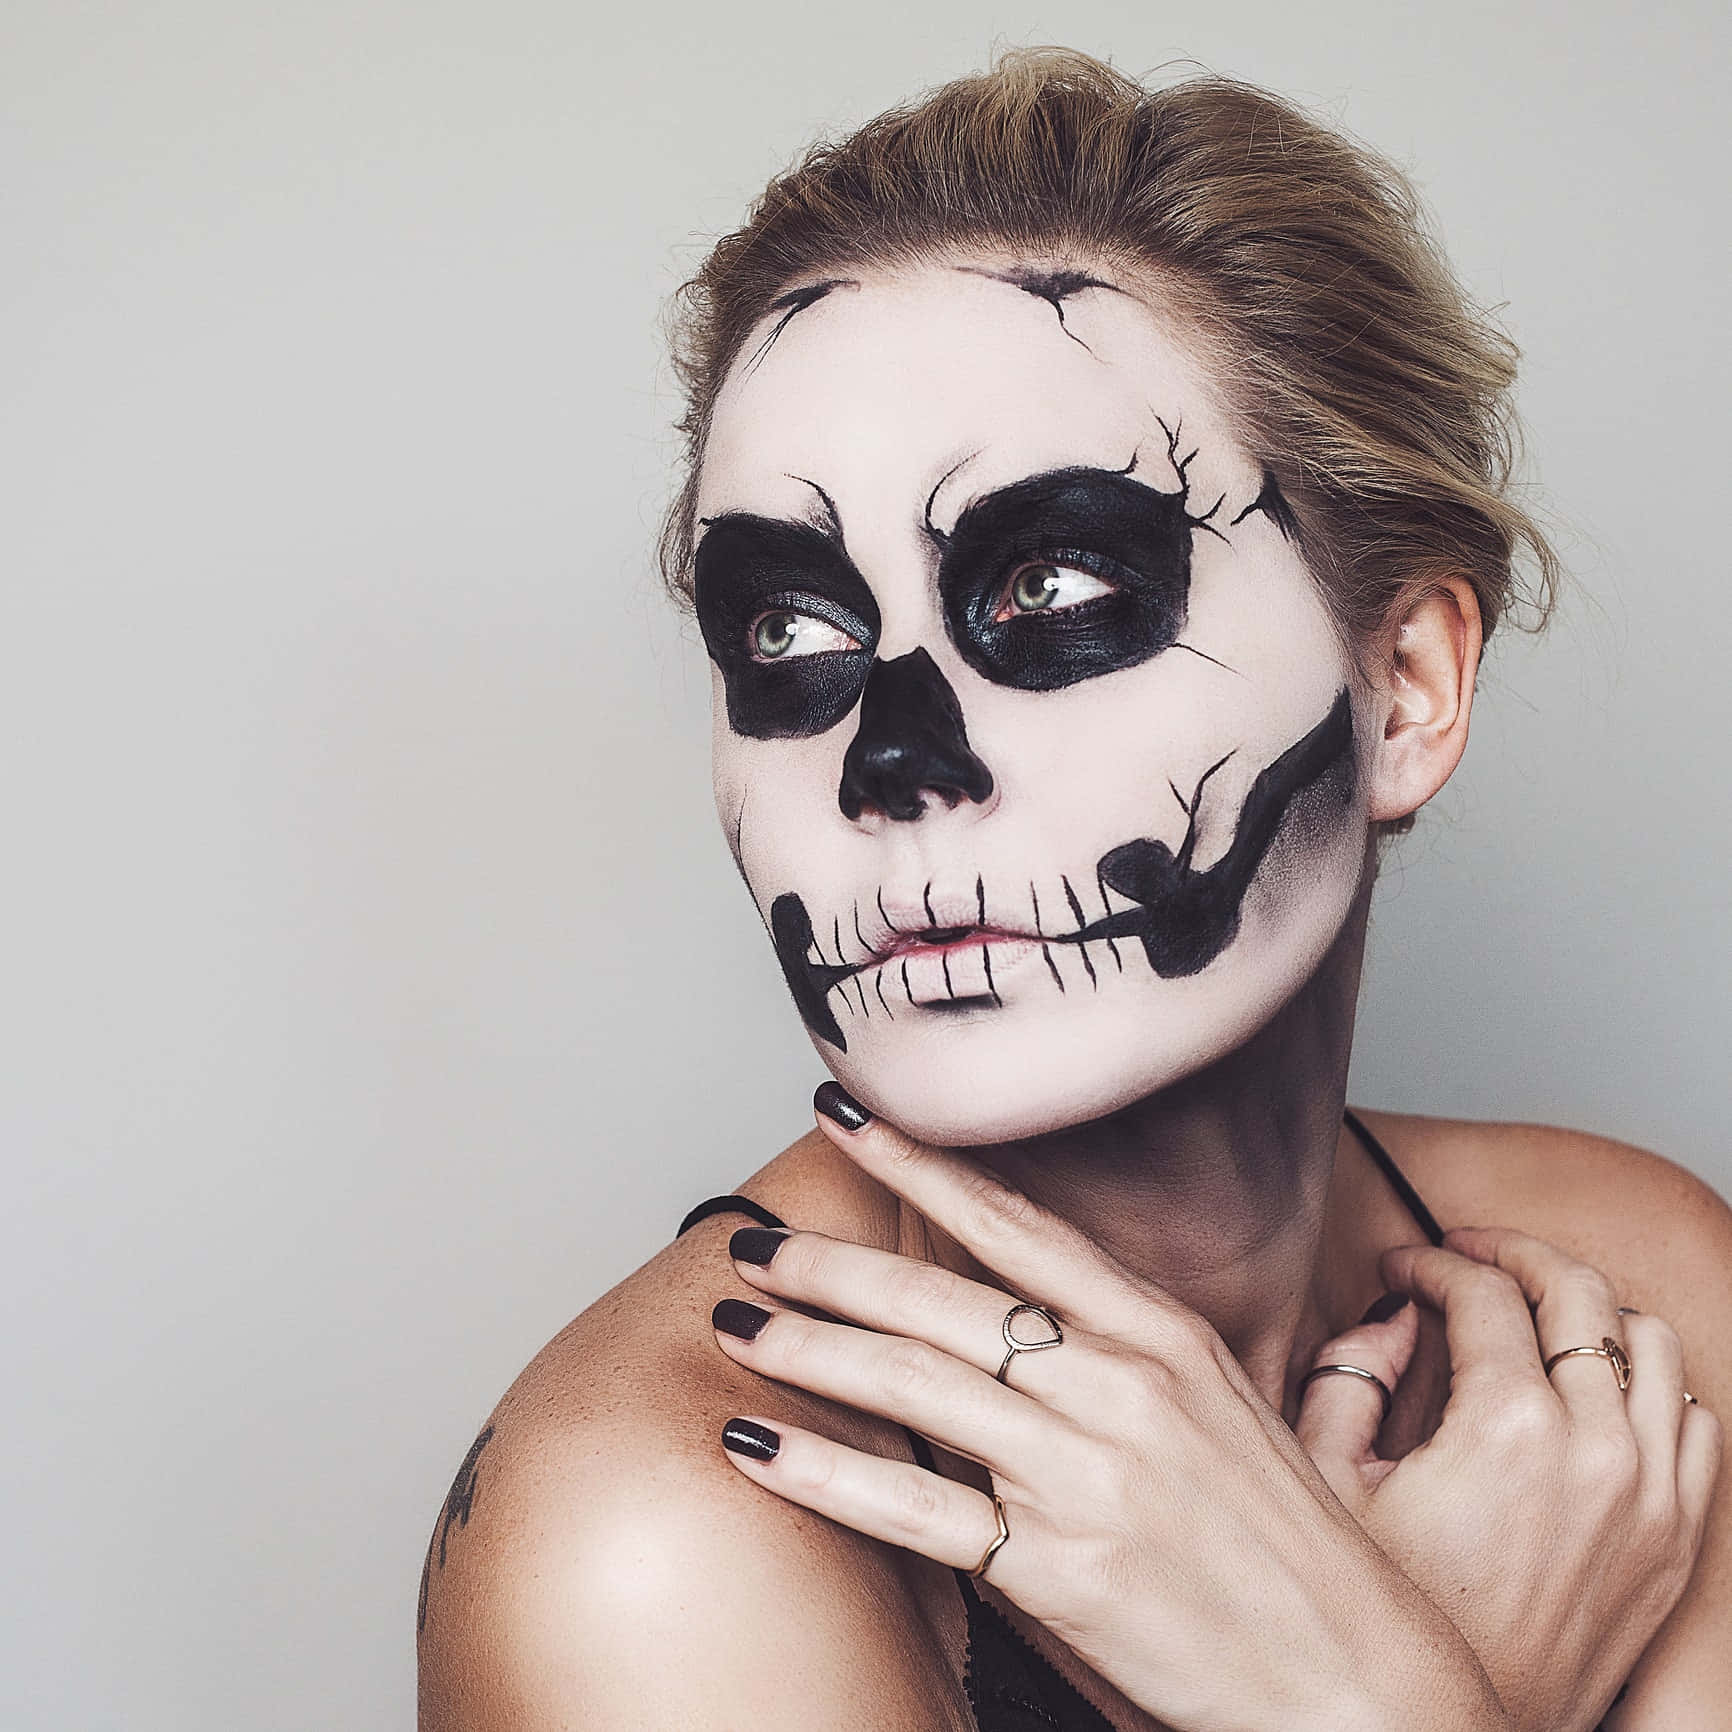 Bring Out Your Spooky Side with Halloween Face Paint" Wallpaper